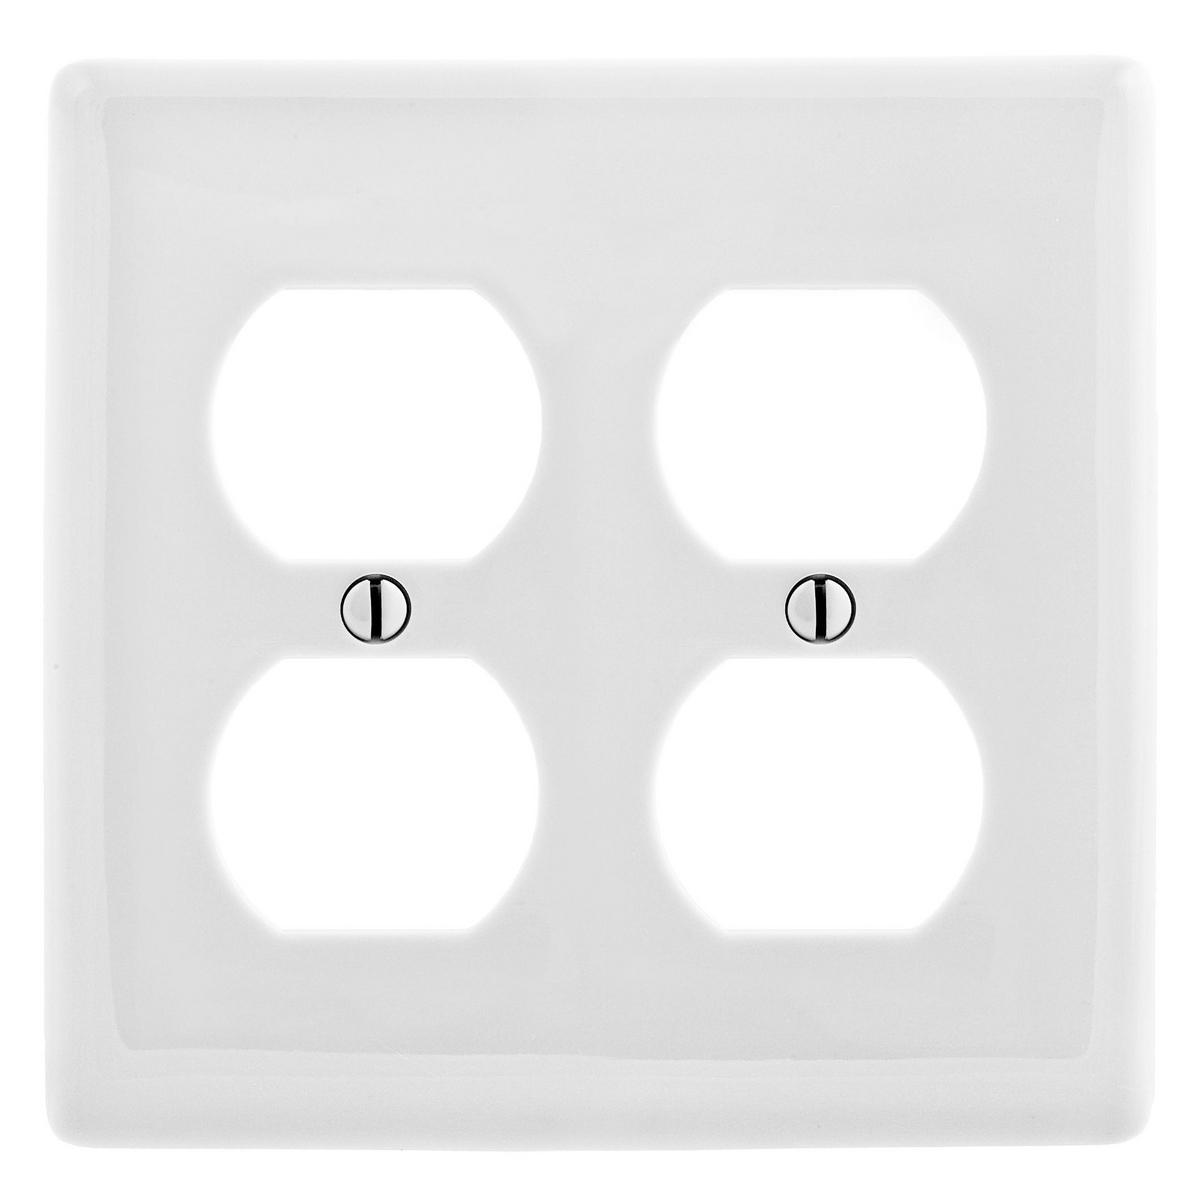 Hubbell NP82W Wallplates and Box Covers, Wallplate, Nylon, 2-Gang, 2) Duplex, White  ; Reinforcement ribs for extra strength ; Captive screw feature holds mounting screw in place ; High-impact, self-extinguishing nylon material ; Standard Size is 1/8" larger to give yo